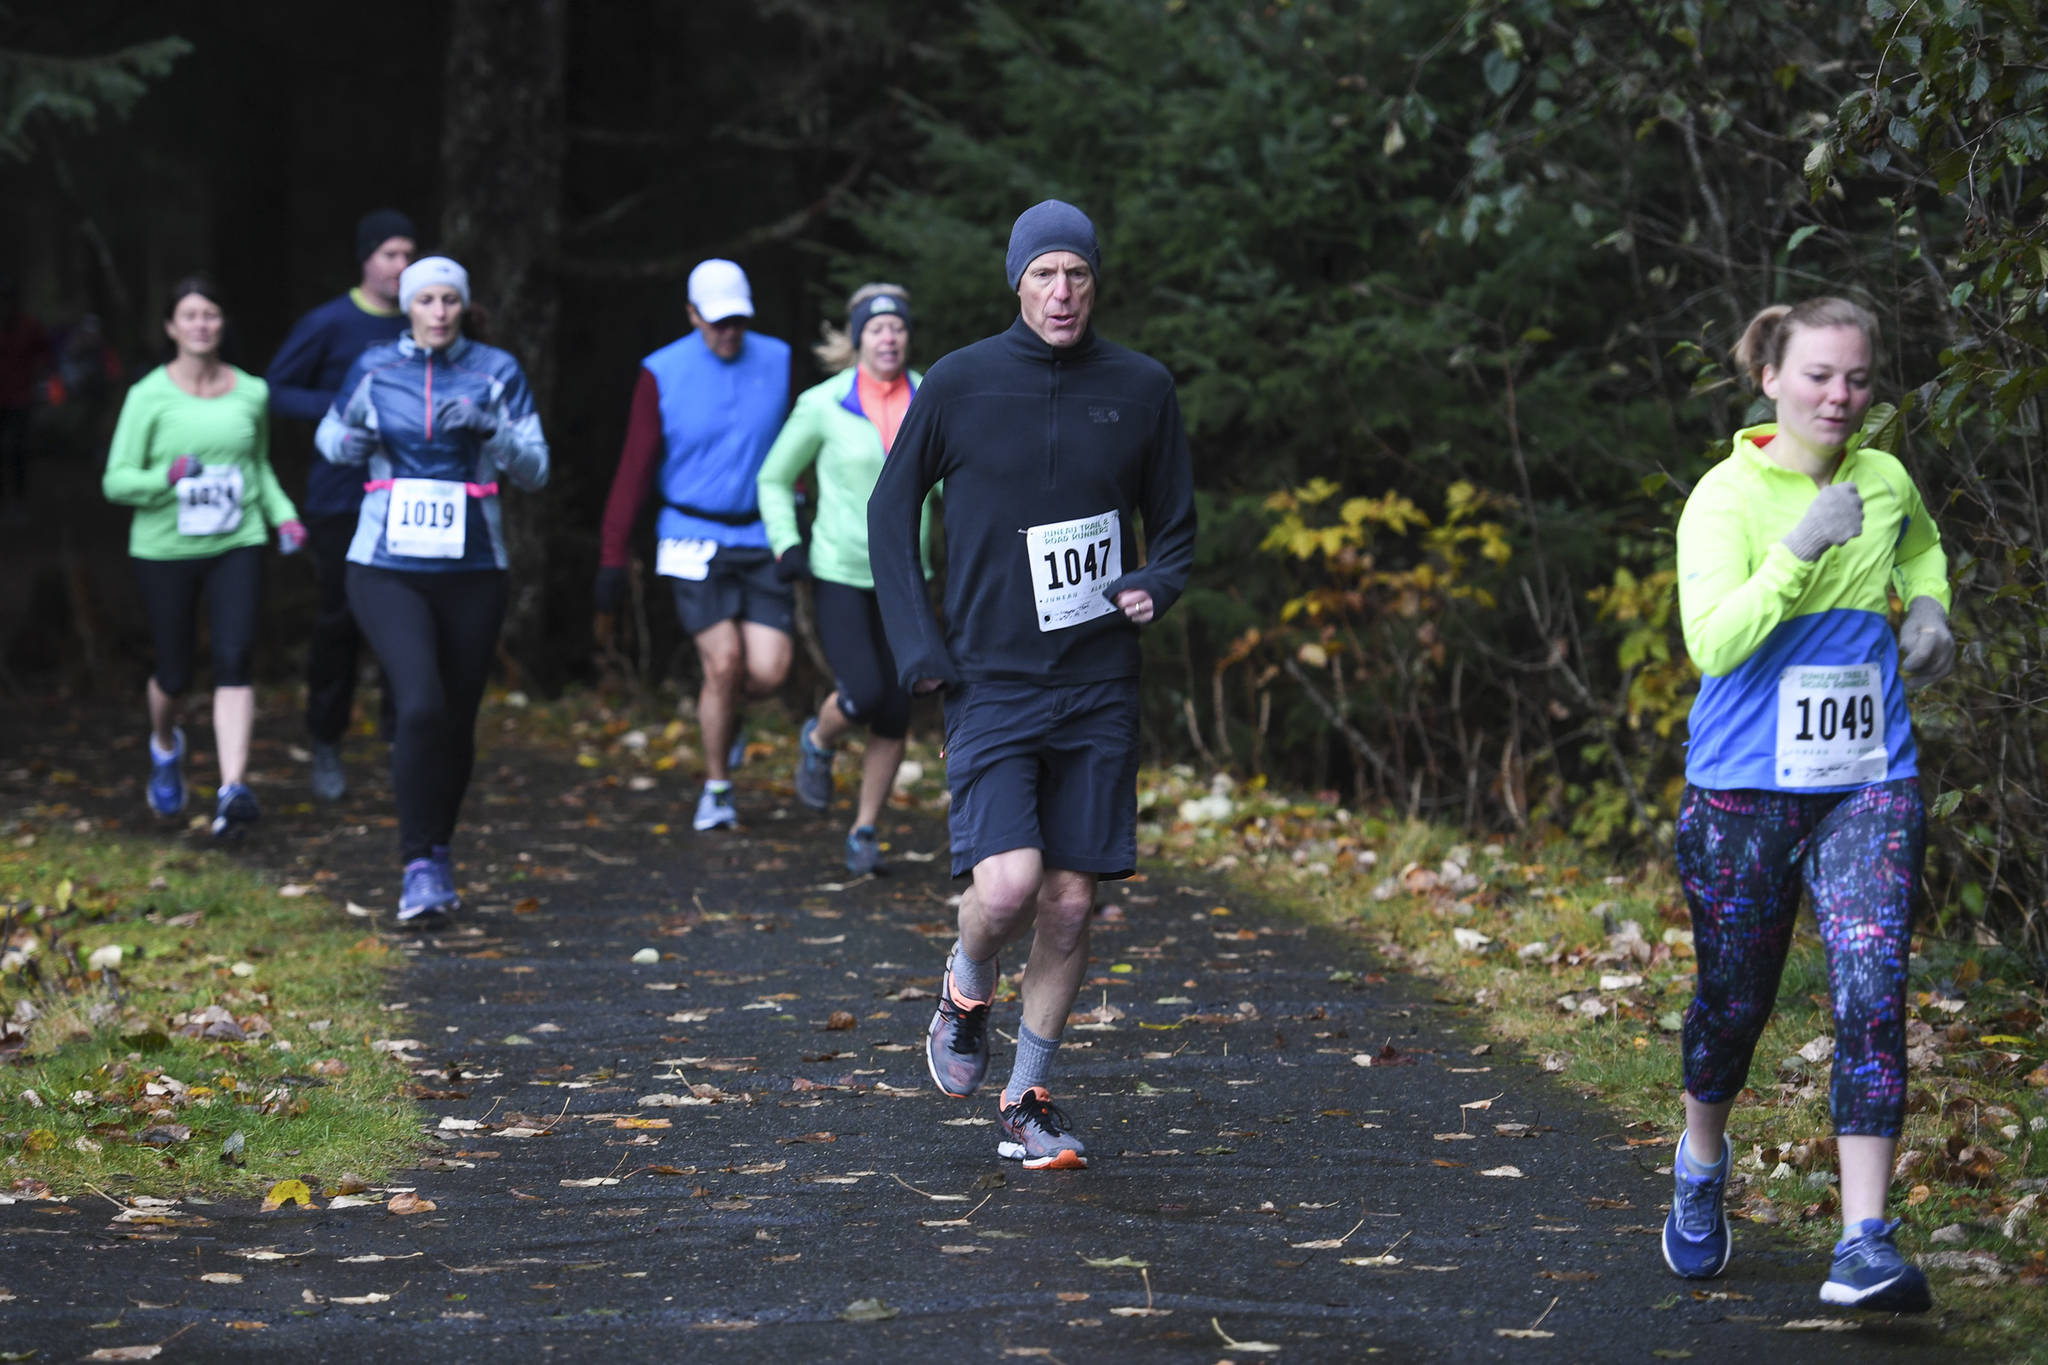 Juneau residents participate in the annual community mental health run, the Extra Tough 5K & 1 Mile Run, on Saturday, Oct. 12, 2019, starting at Riverbend Elementary School. The run is sponsored by National Alliance on Mental Illness (NAMI) Juneau. (Michael Penn | Juneau Empire)